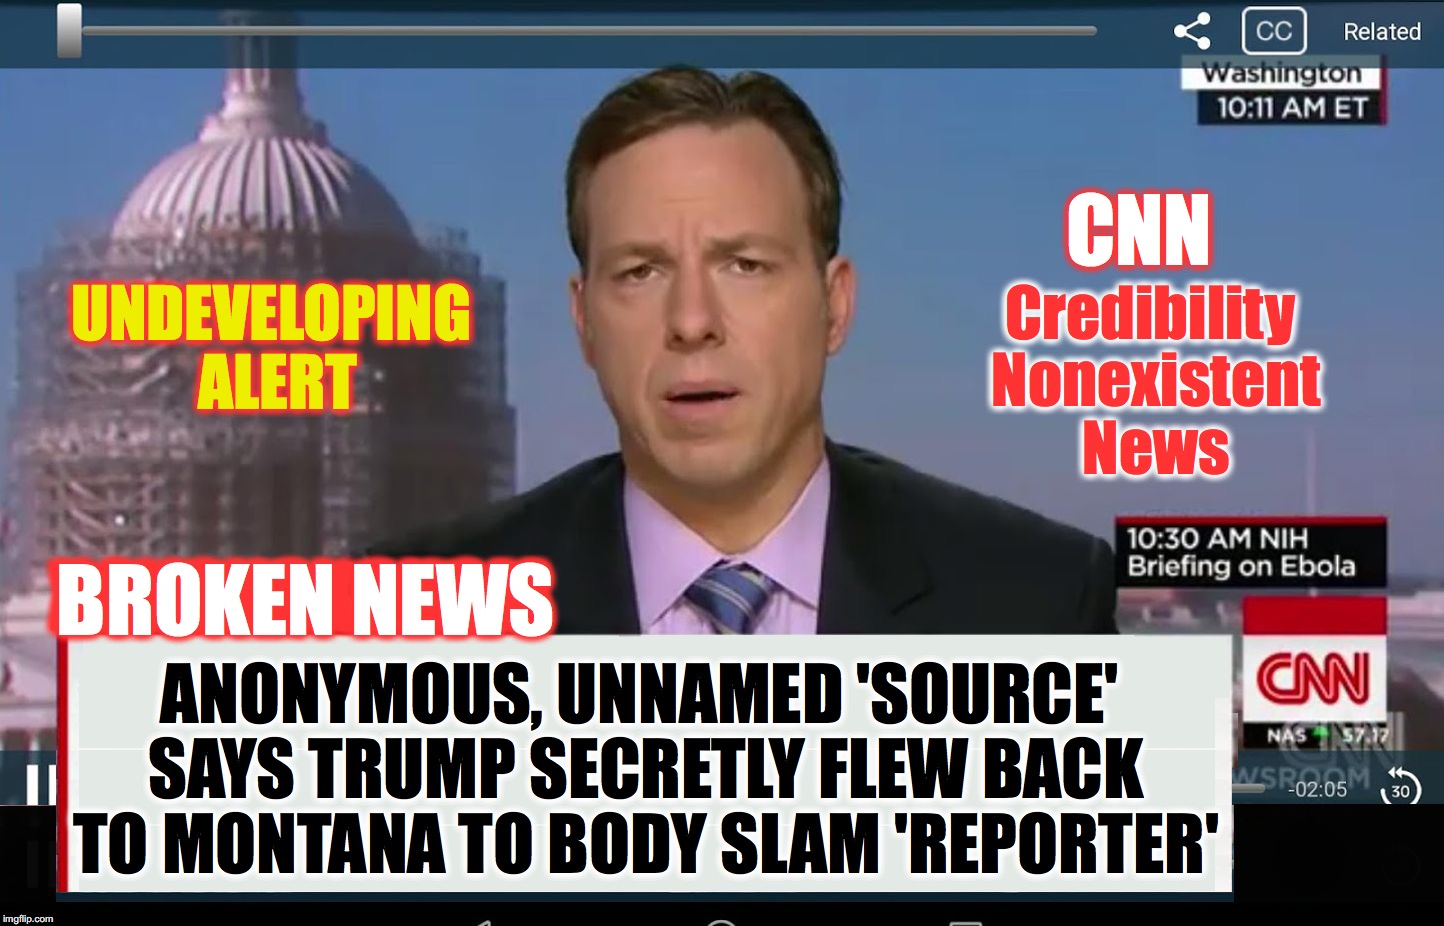 CNN Crazy News Network | CNN; UNDEVELOPING ALERT; Credibility Nonexistent News; BROKEN NEWS; XOXOXOXOXOM; ANONYMOUS, UNNAMED 'SOURCE' SAYS TRUMP SECRETLY FLEW BACK TO MONTANA TO BODY SLAM 'REPORTER' | image tagged in cnn crazy news network | made w/ Imgflip meme maker